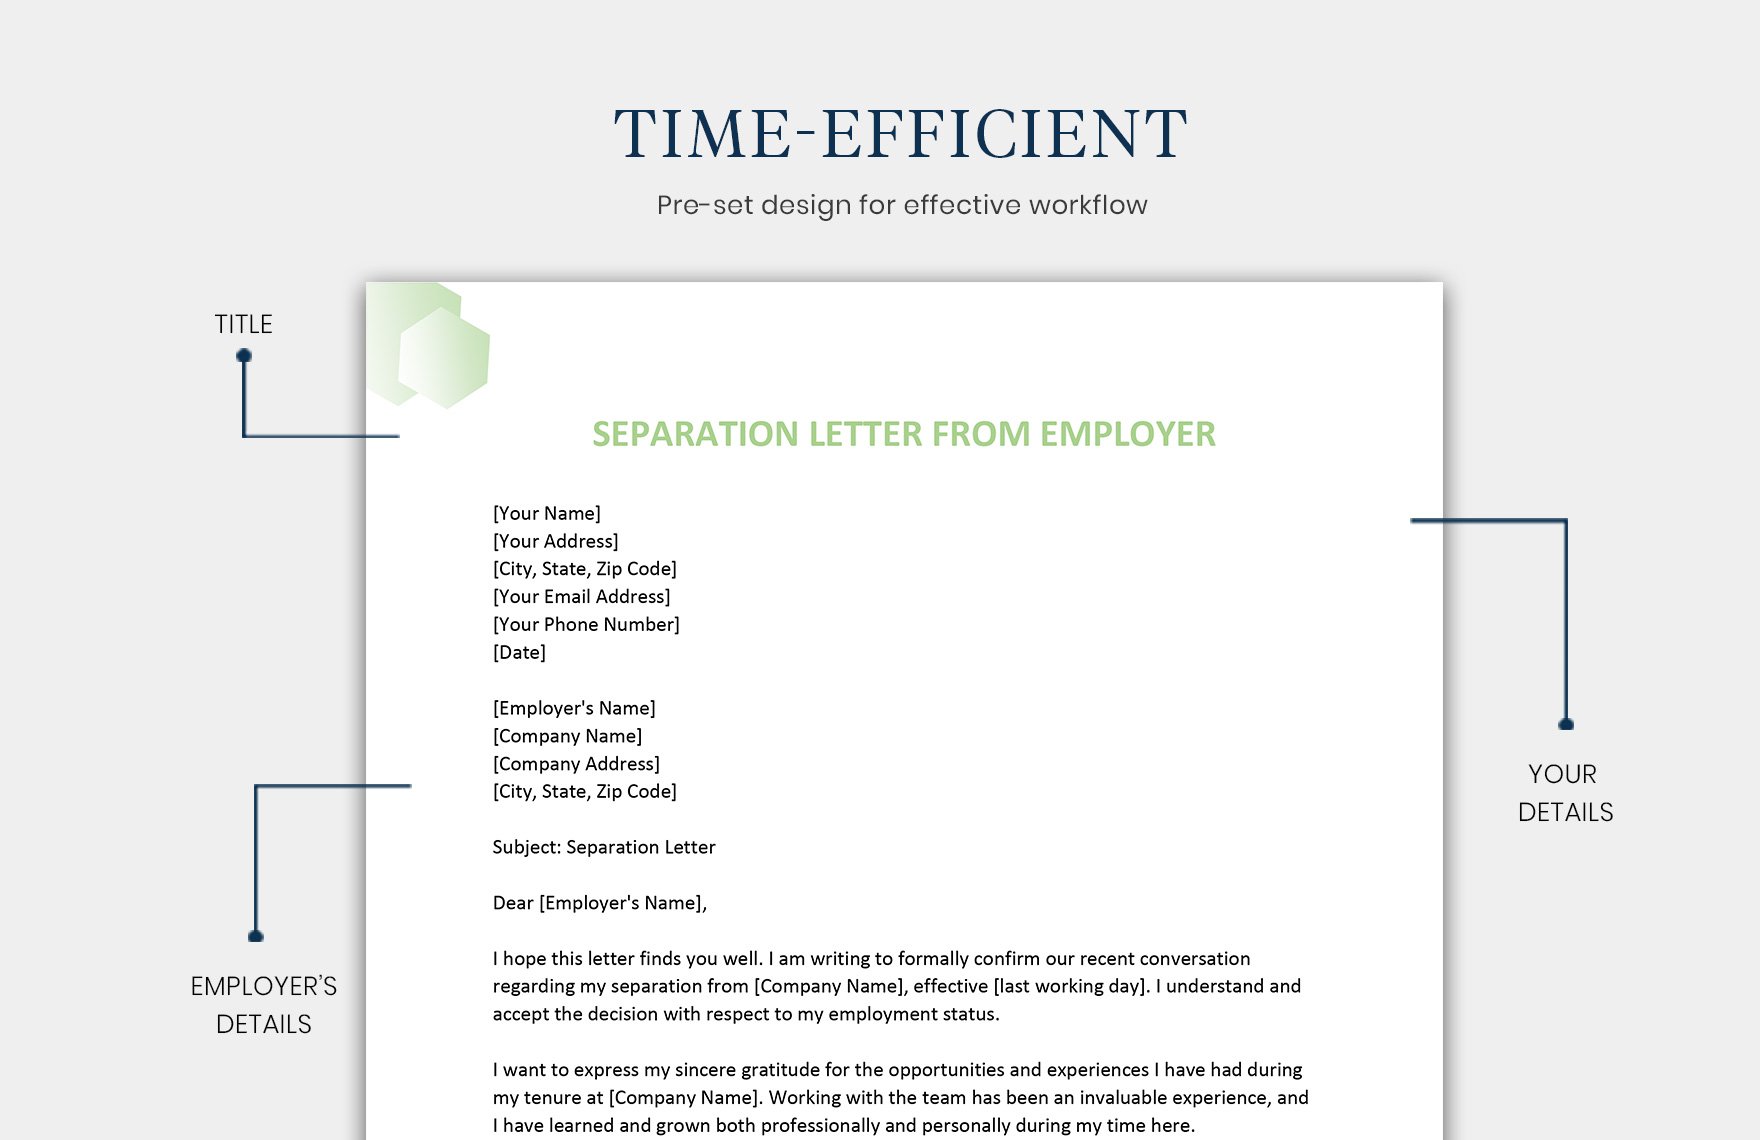 Separation Letter From Employer